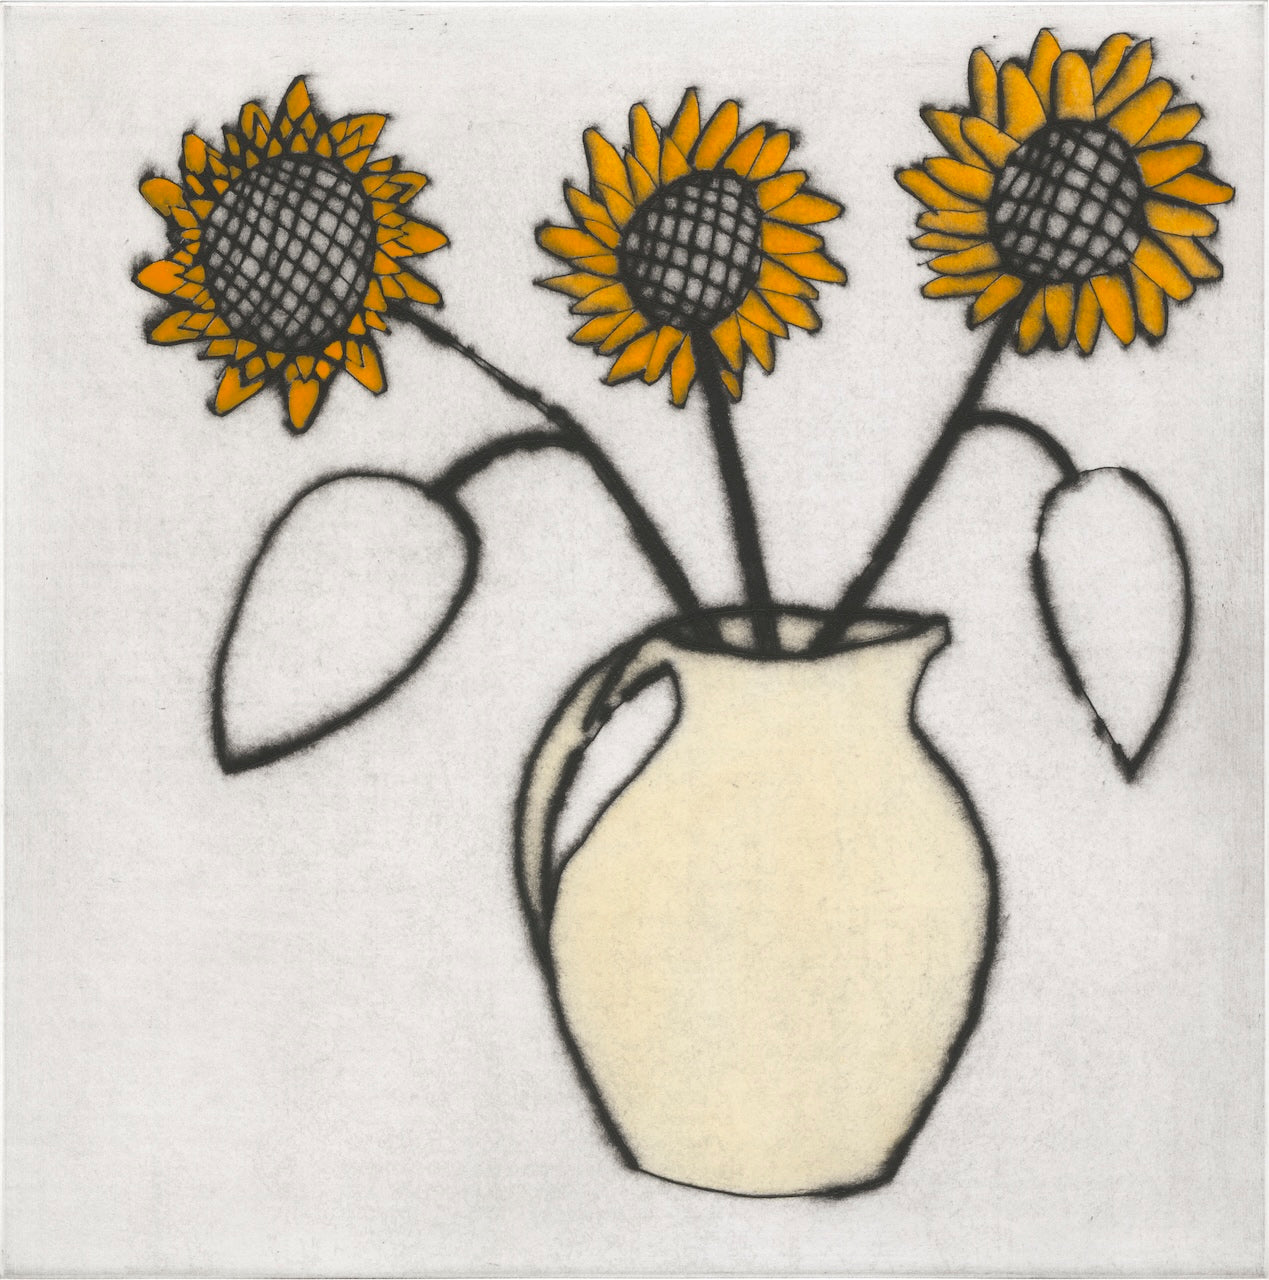 Sunflowers - Limited Edition drypoint and watercolour fine art print by artist Richard Spare